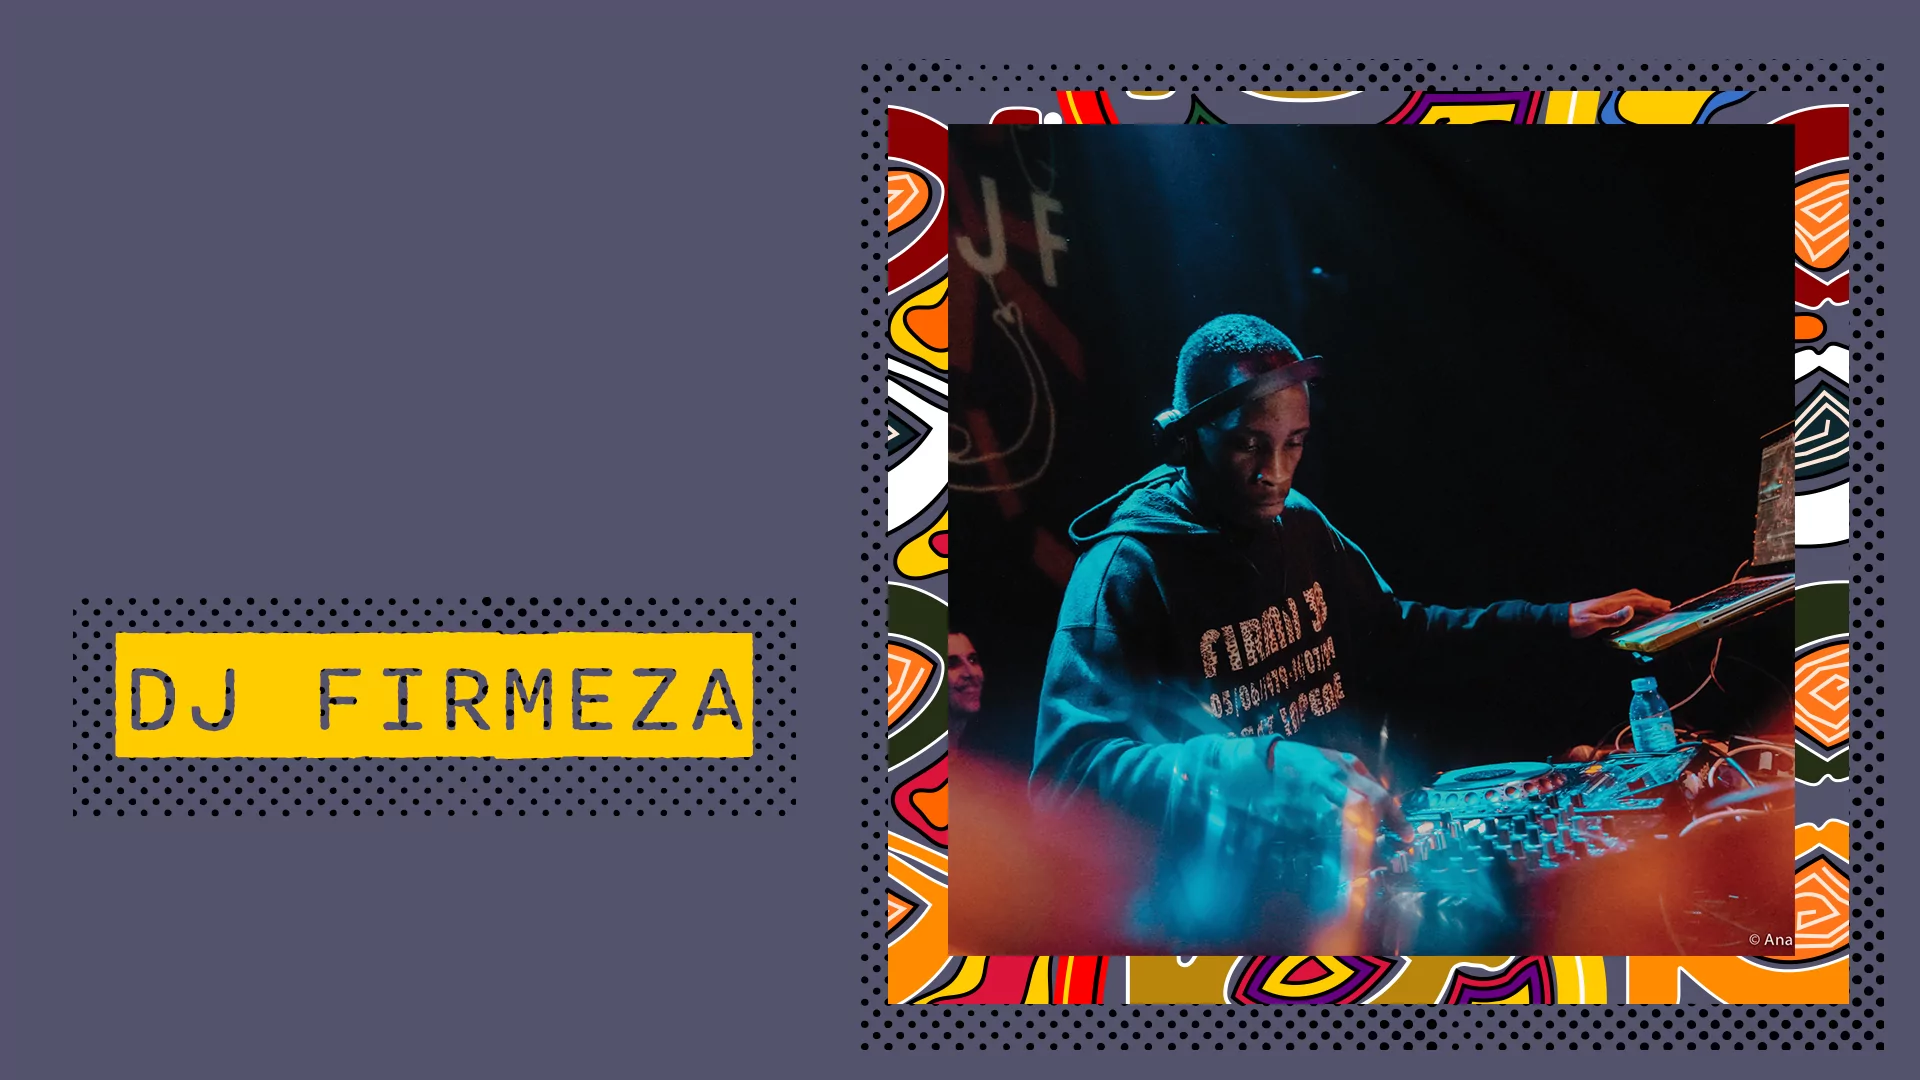 Purple collage featuring an image of DJ Firmeza mixing behind the decks and his name in yellow block font